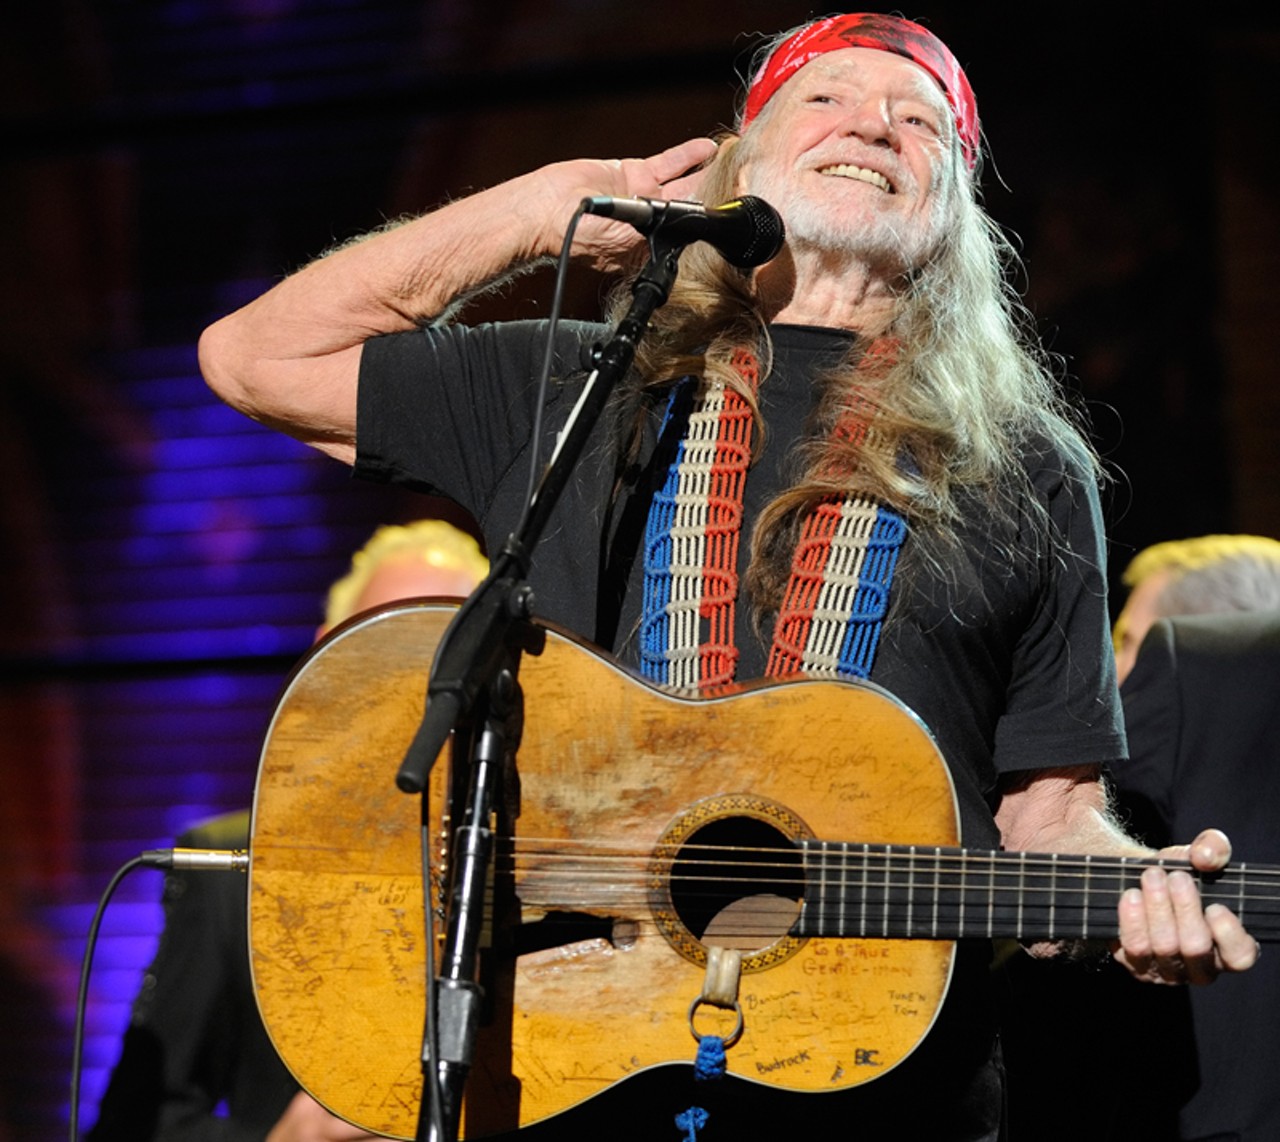 Willie Nelson at Farm Aid in St. Louis on October 4, 2009.